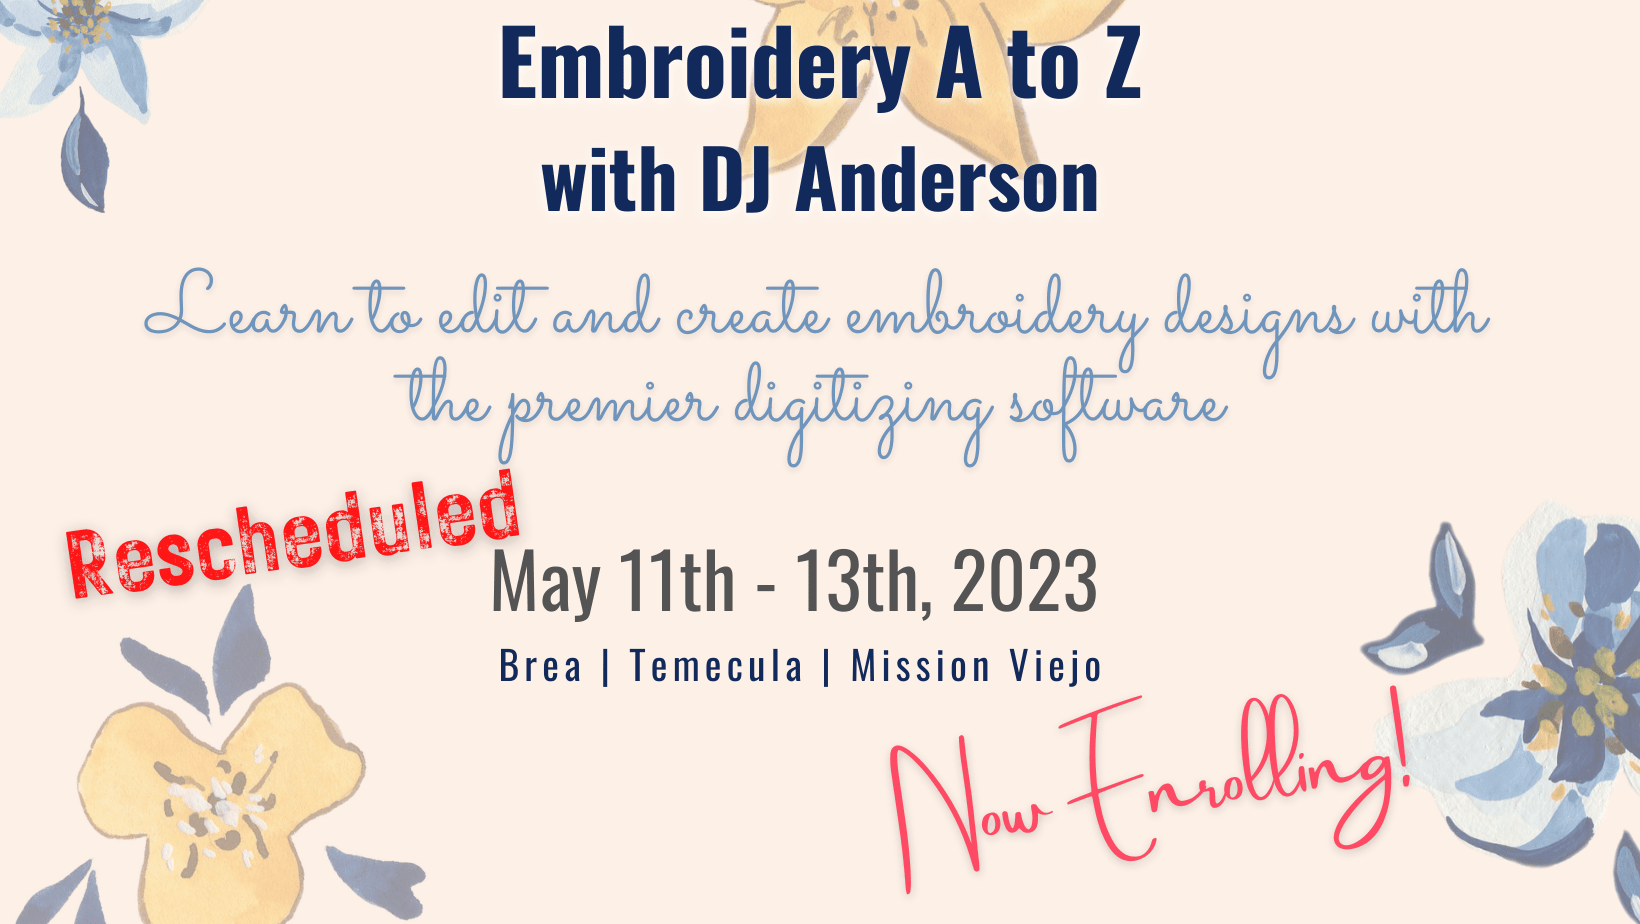 Embroidery A to Z Info Card with updated dates